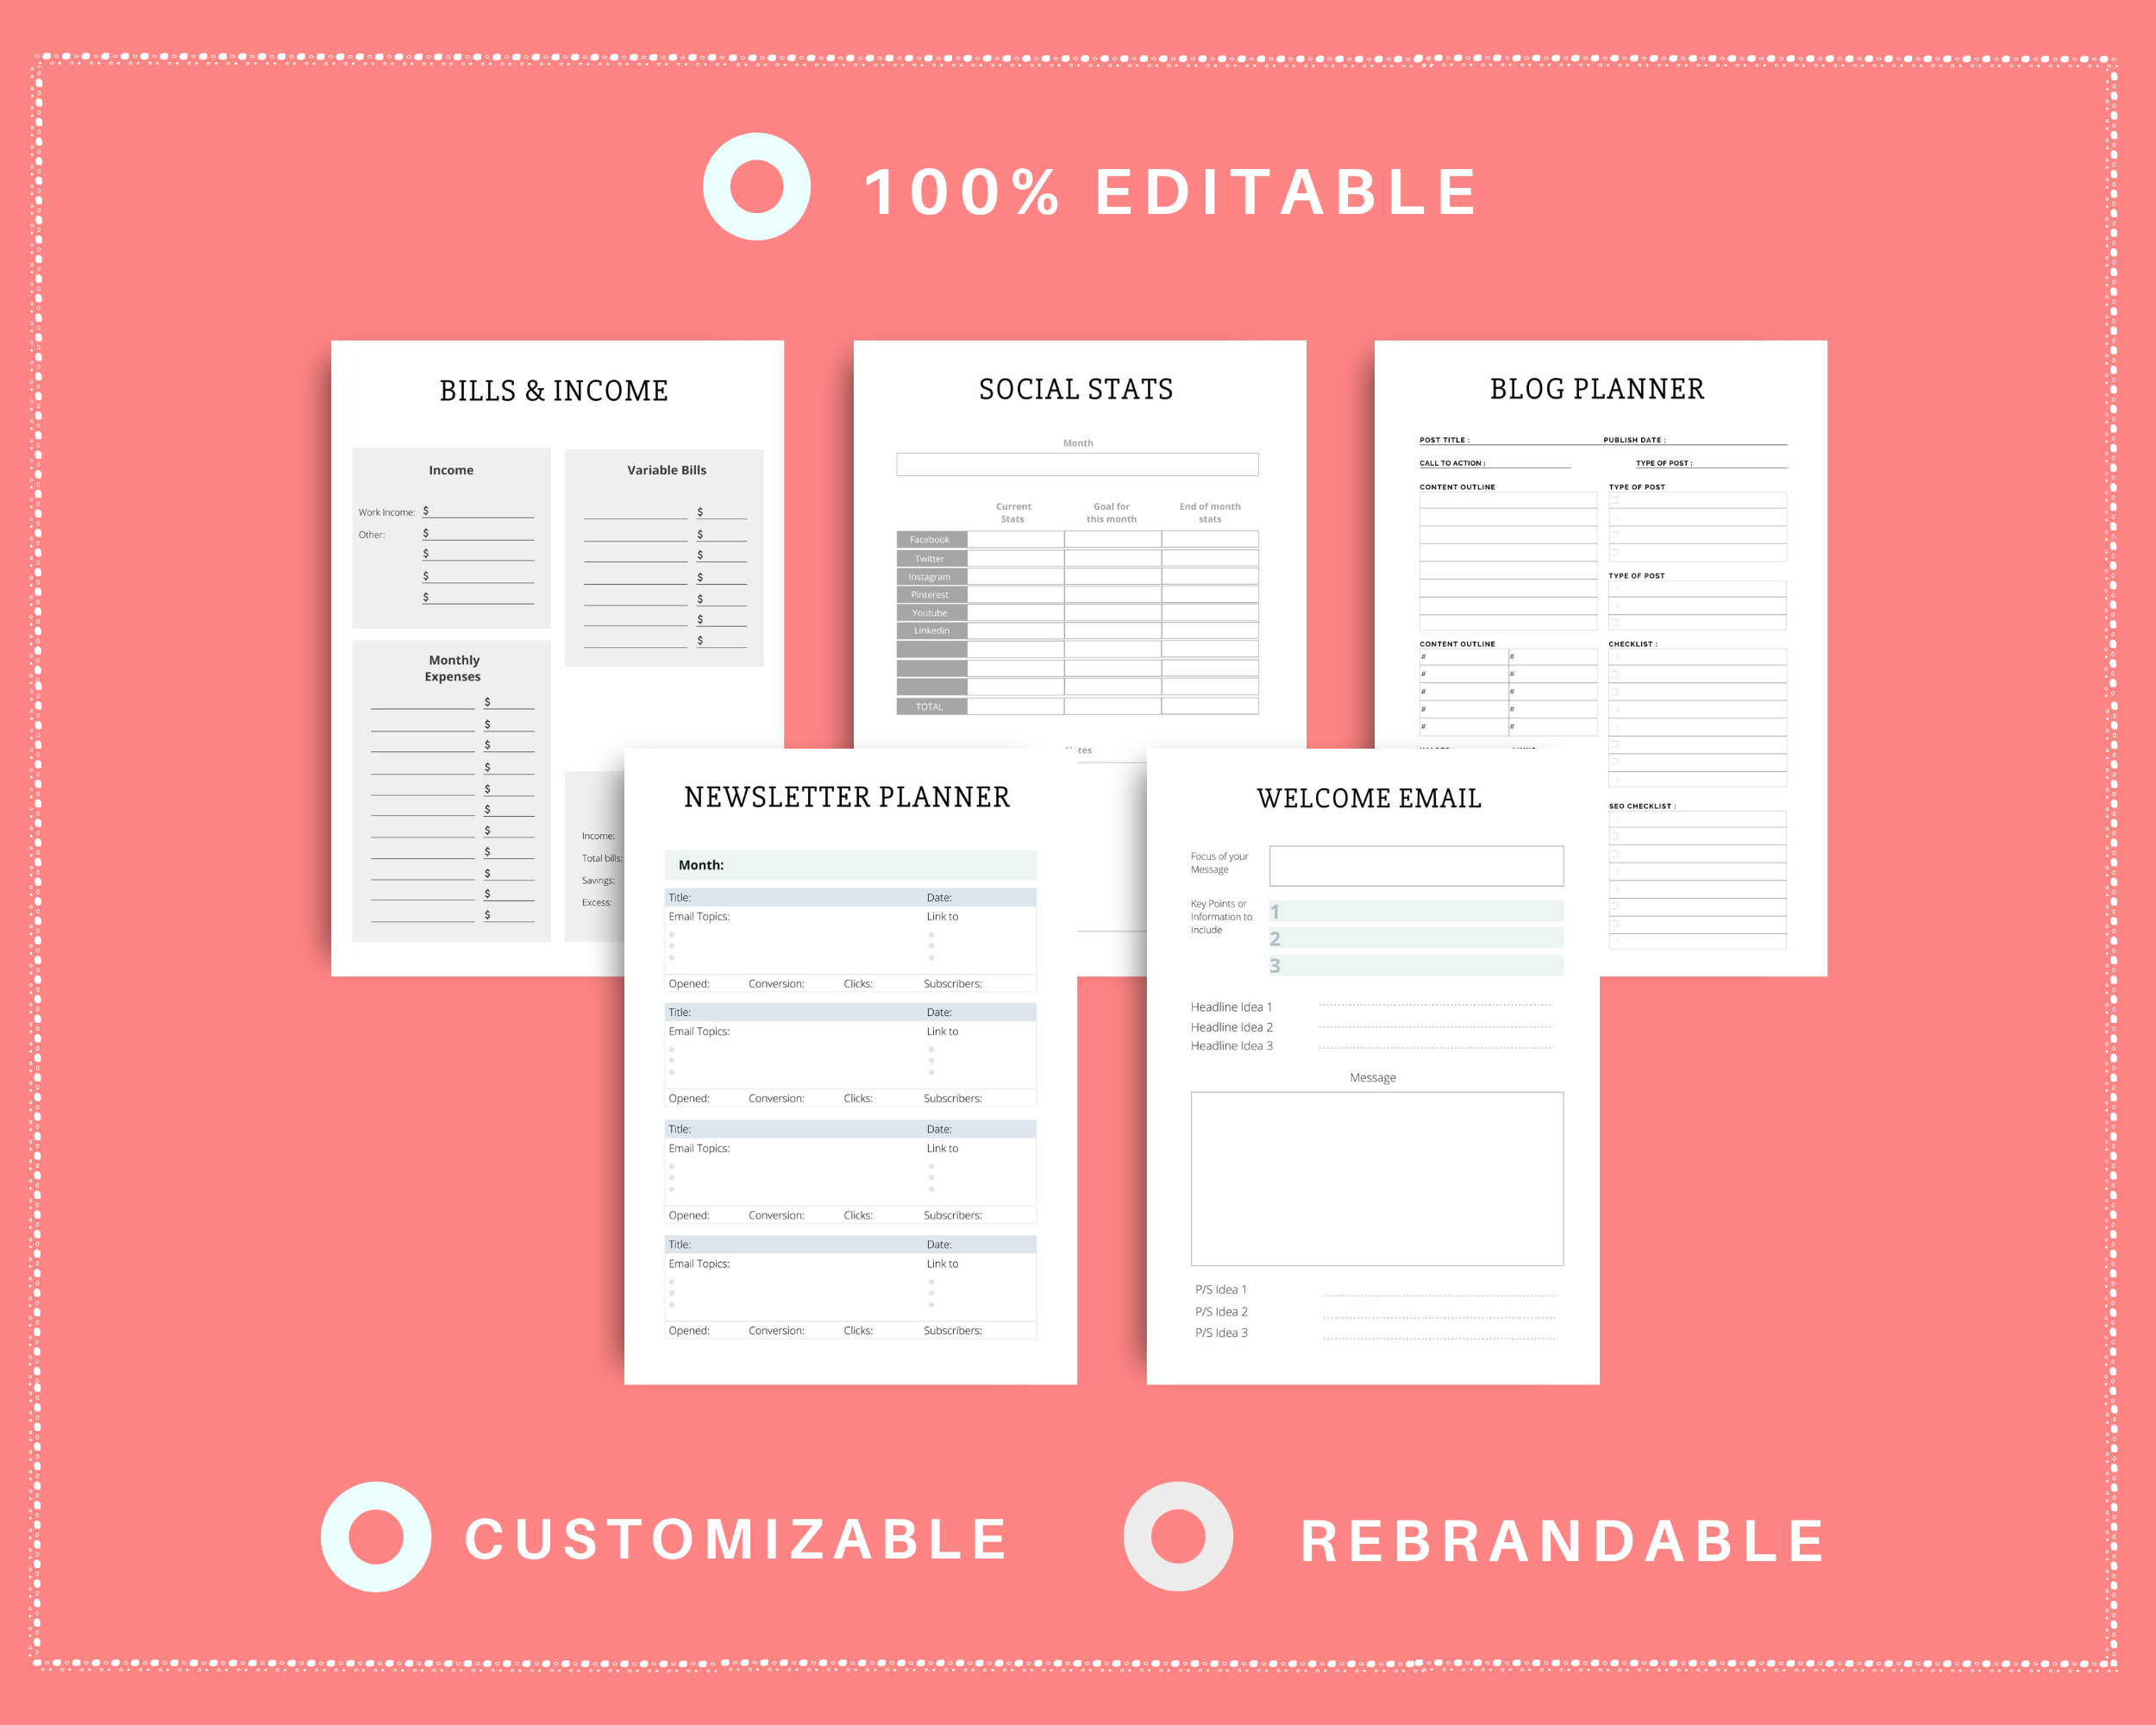 Editable Marketing Planner Templates in Canva | Commercial Use